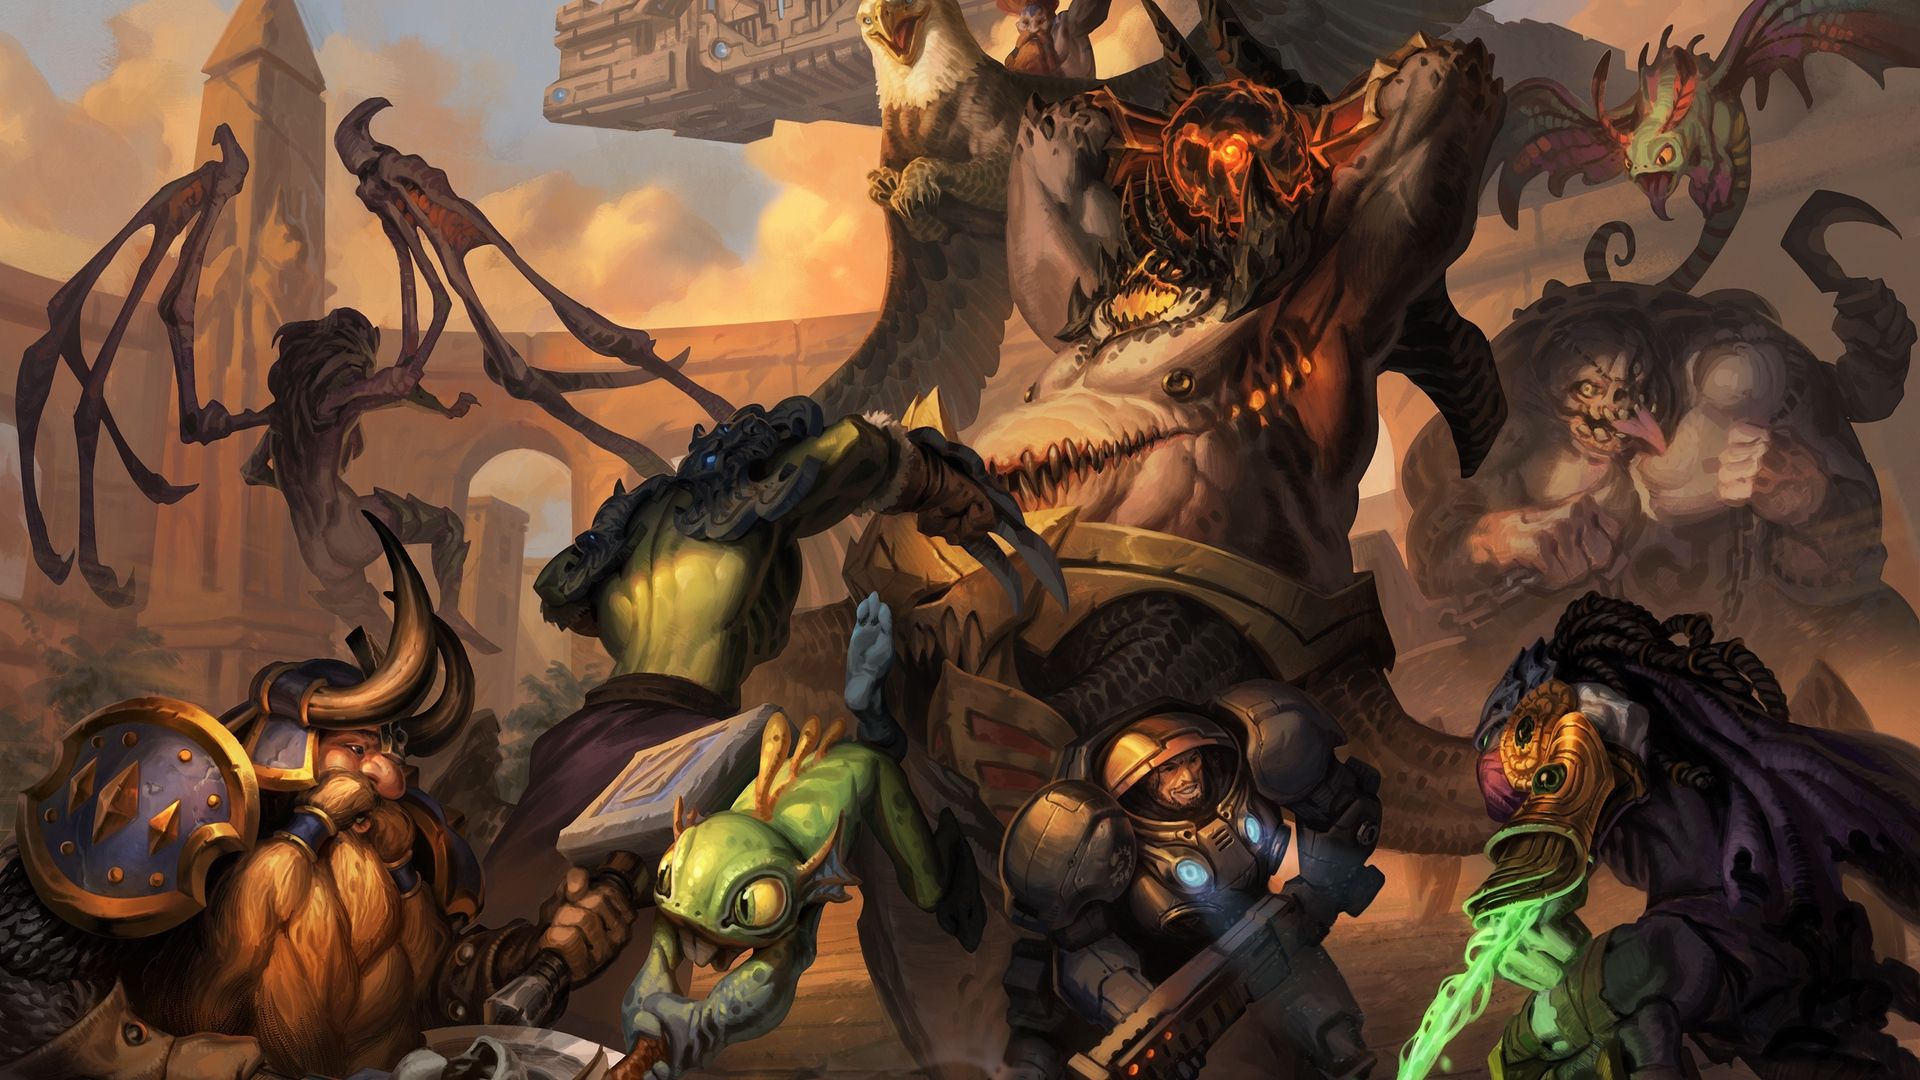 1920x1080 Download Wallpaper 1920x1080 Heroes Of The Storm Warcraft